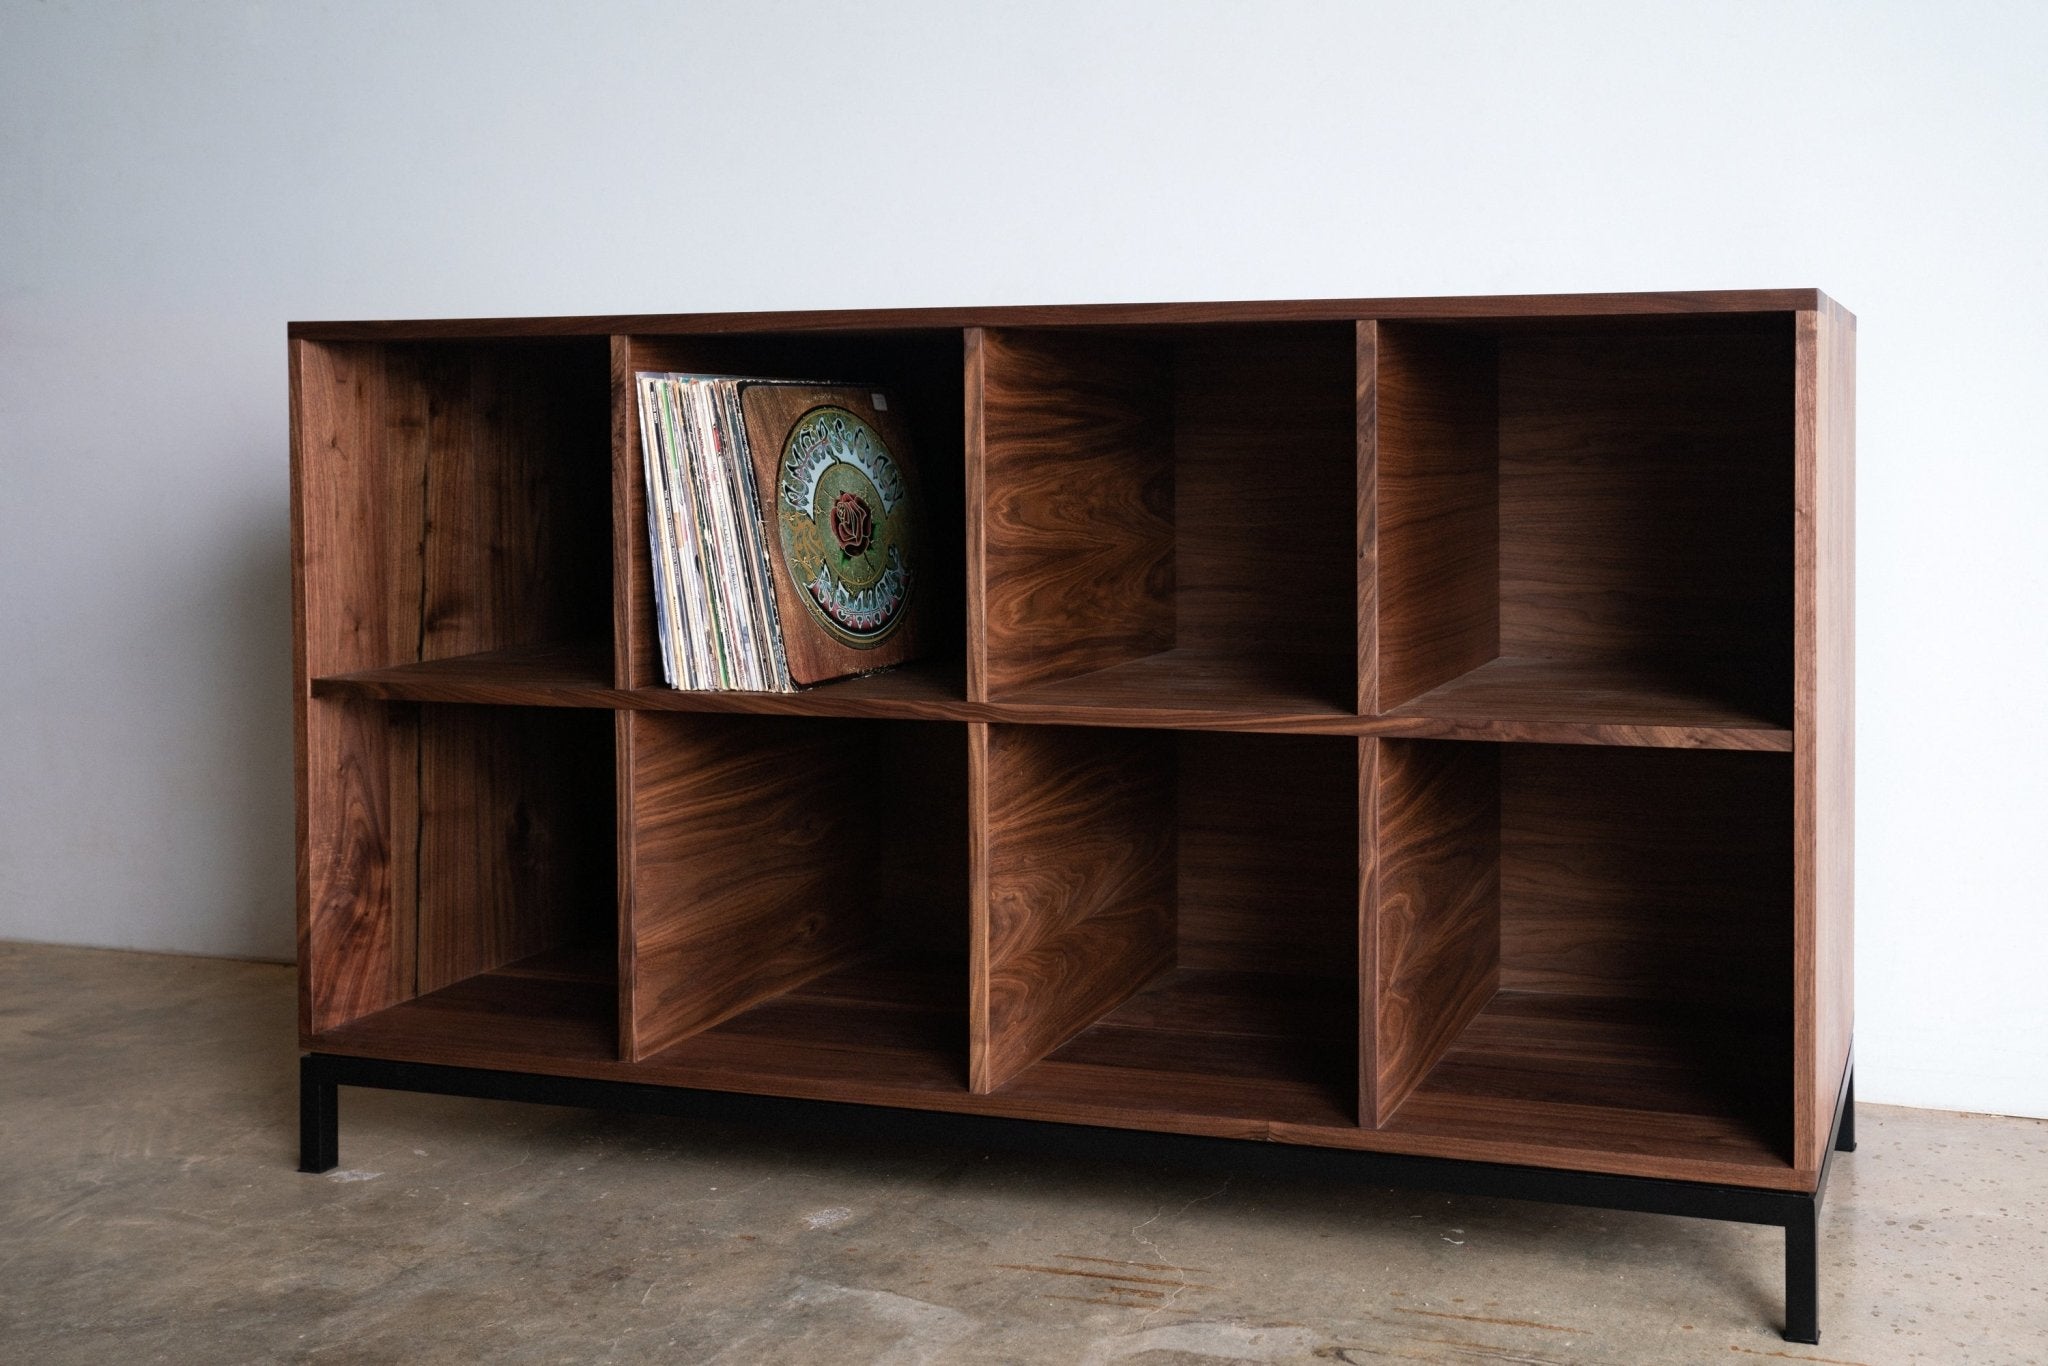 All Bookcases - Bookshelves, and Storage Credenzas